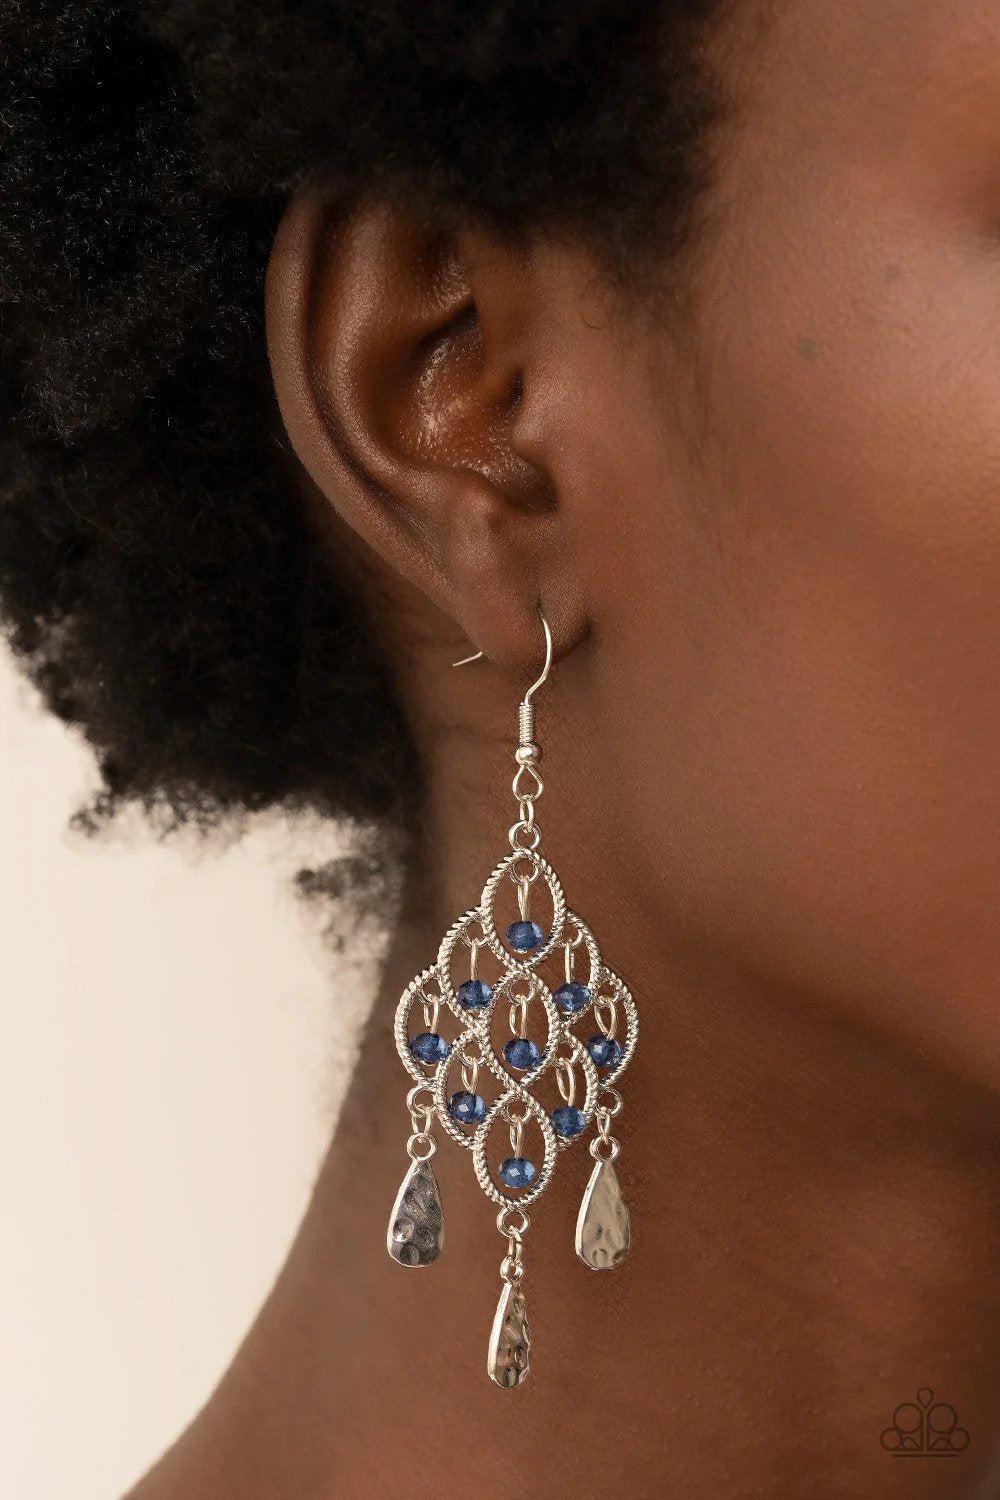 Sentimental Shimmer Blue Earrings - Paparazzi Accessories- on model - CarasShop.com - $5 Jewelry by Cara Jewels